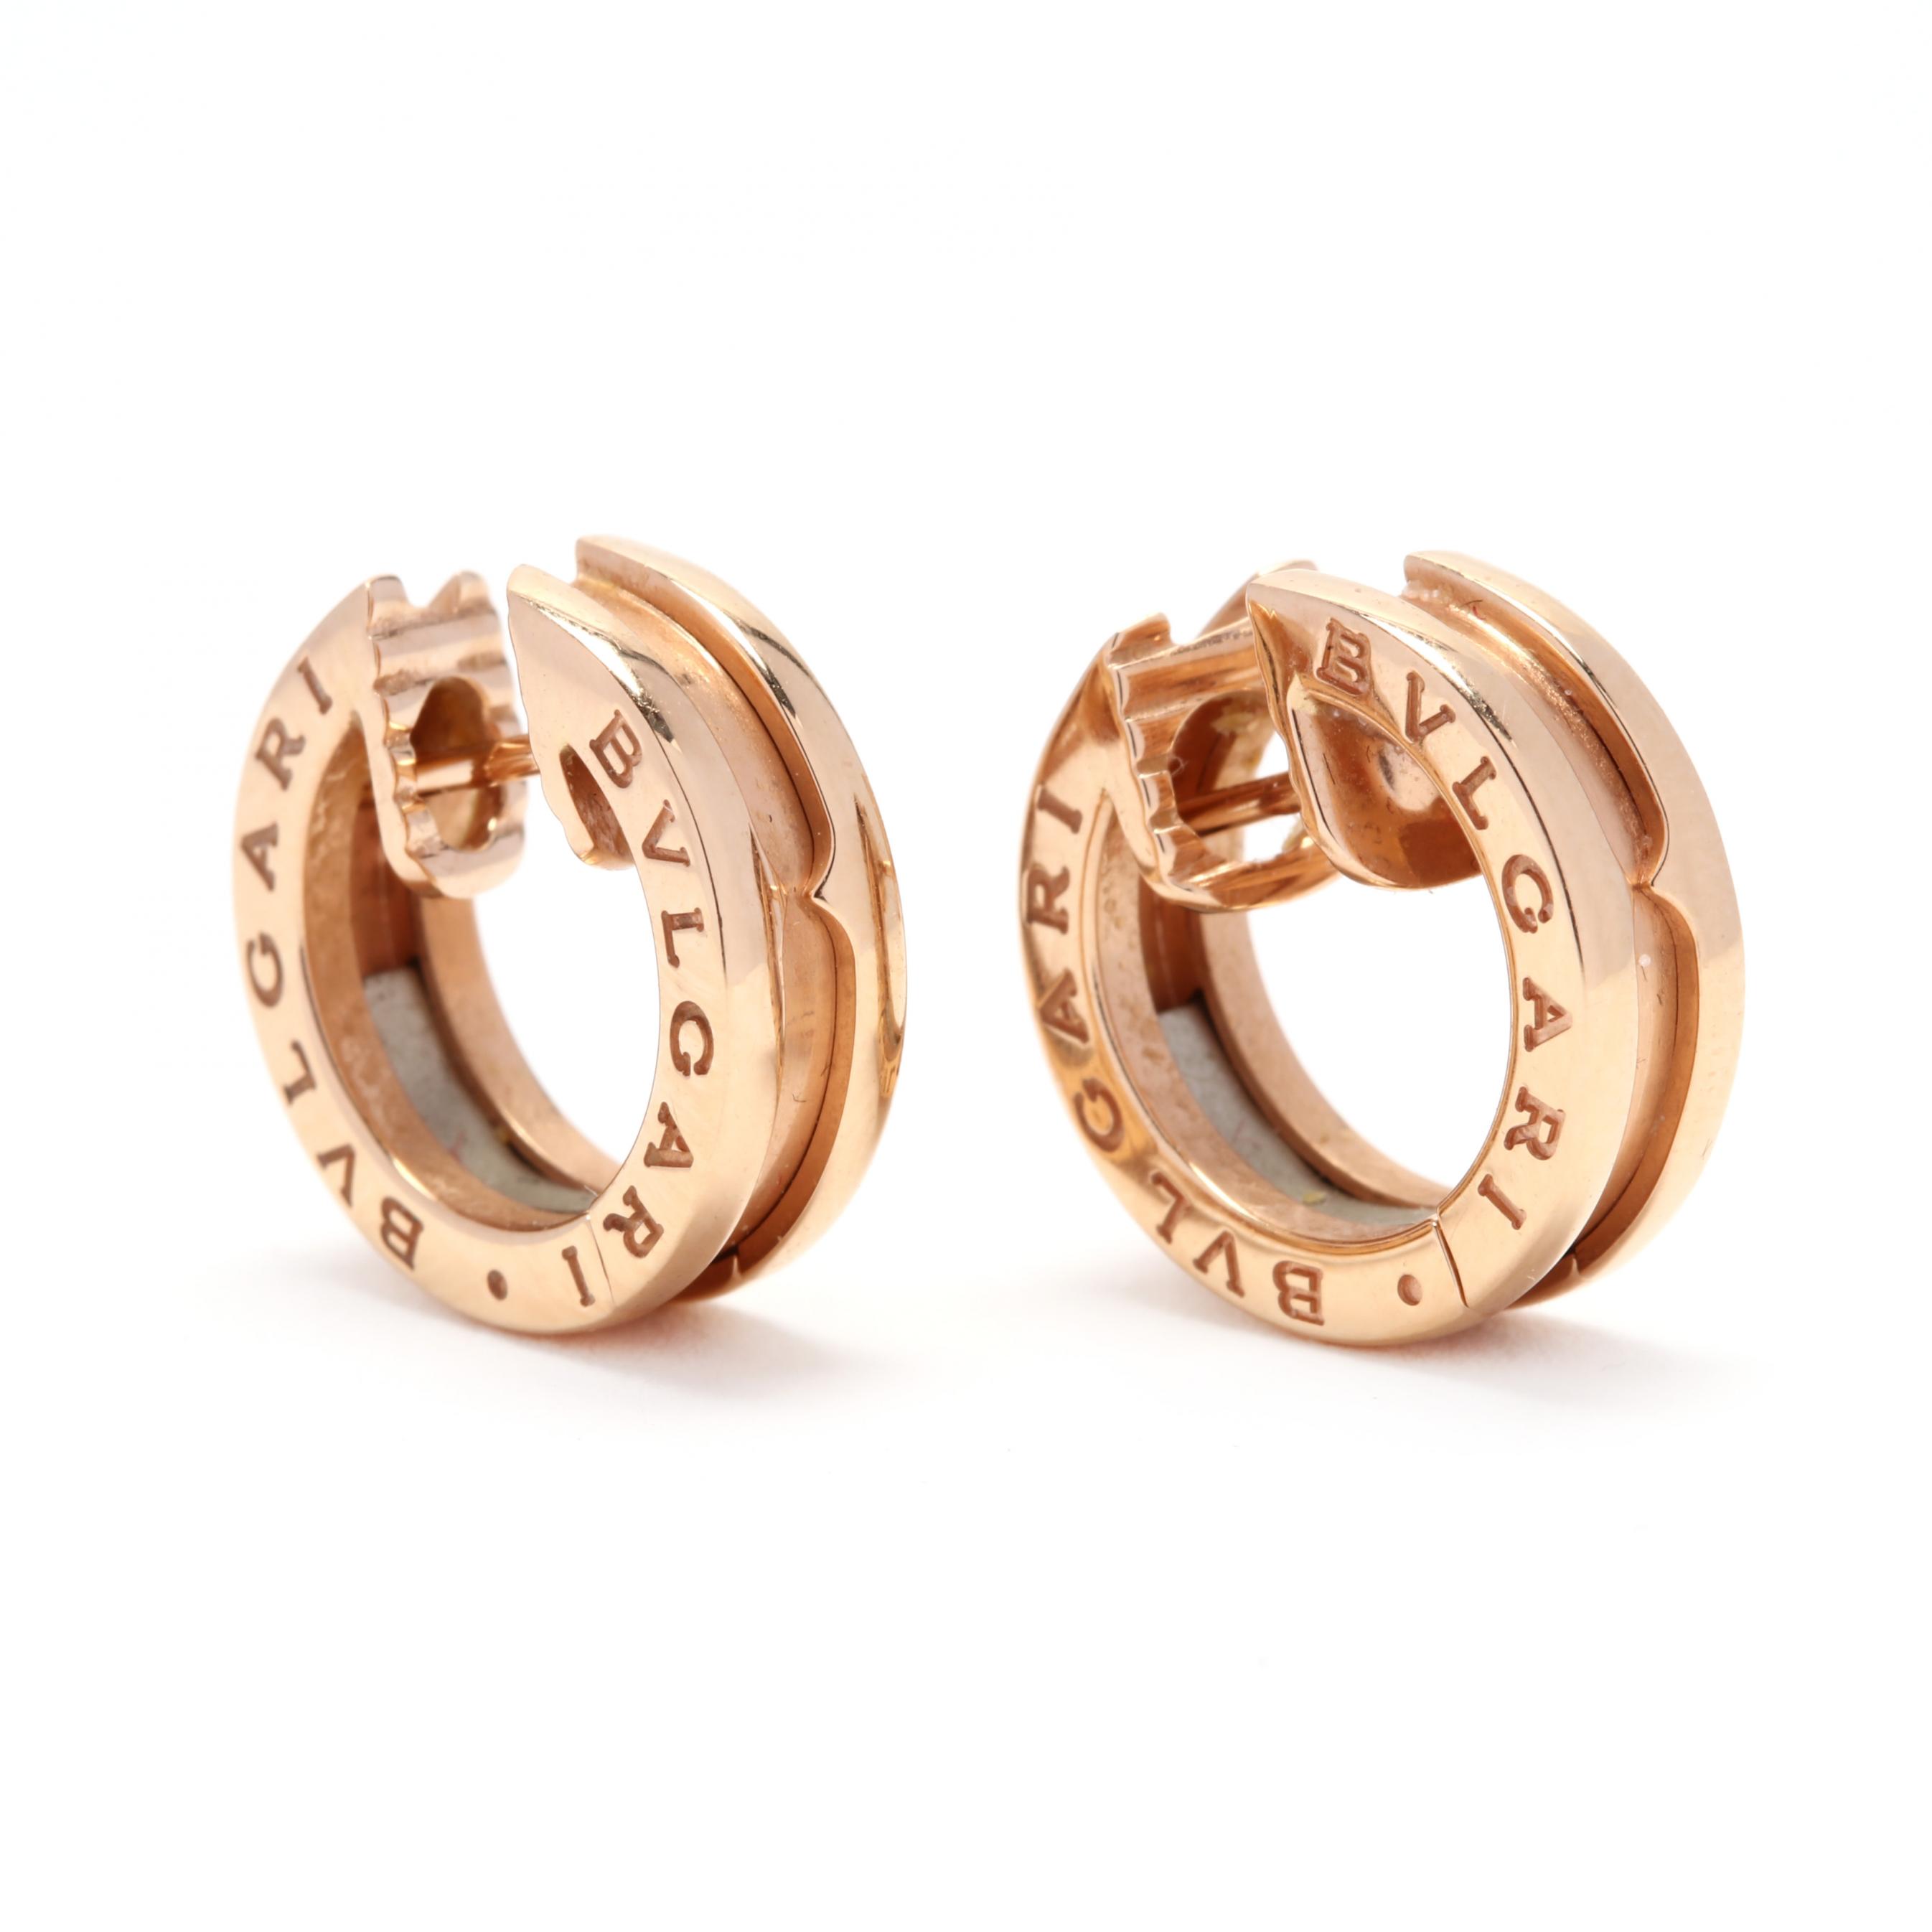 Pink gold earrings Bvlgari Pink in Pink gold  29493837